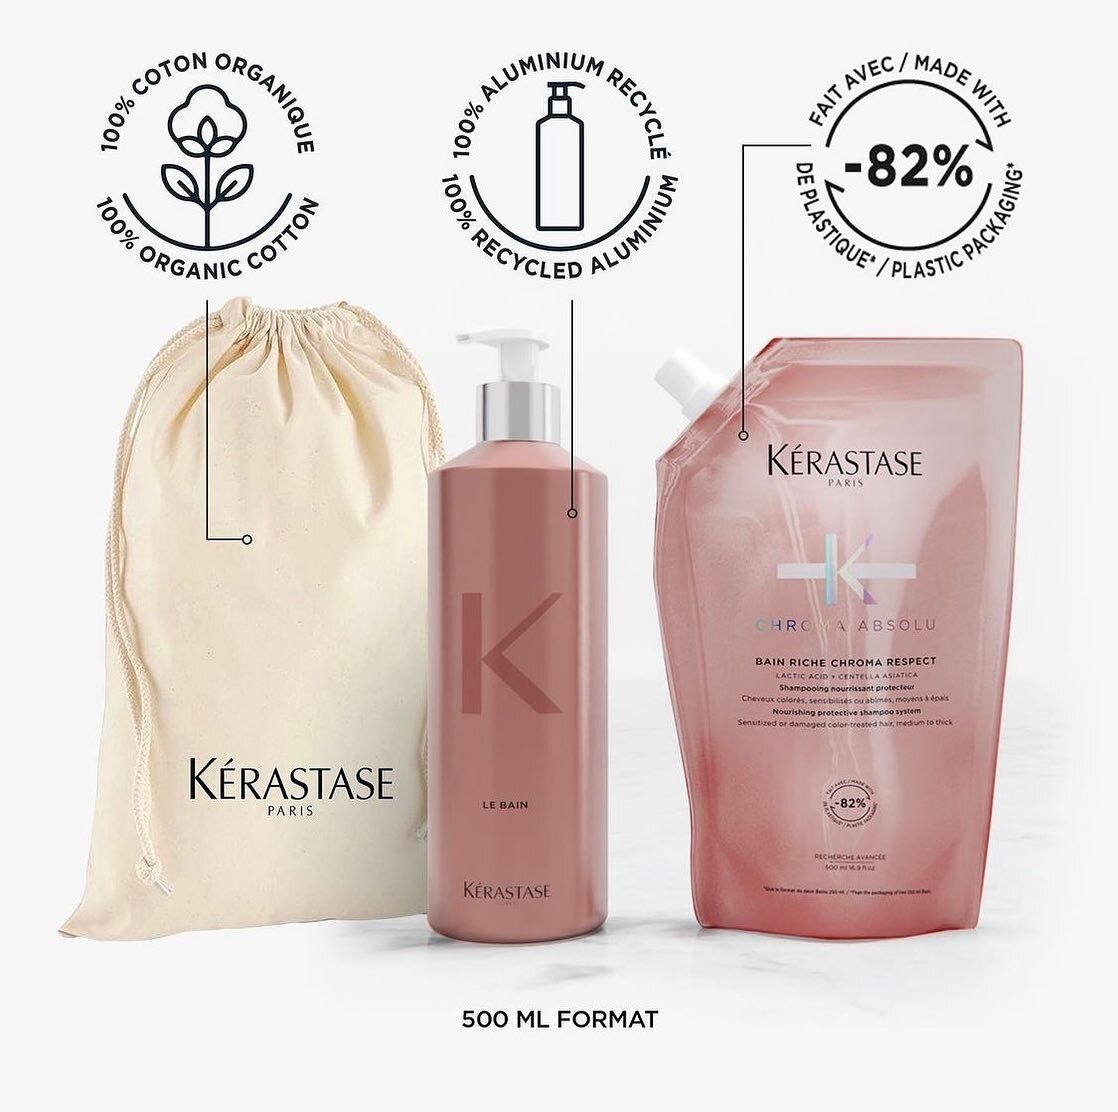 Just in time for Earth Day! 🌎 Less waste, more care. Introducing NEW Refillable Luxury Shampoo Bottles and Pouches from @kerastase_official, coming soon to the salon. Made with 100% recycled aluminum, we cannot wait for you to add this beautiful lux